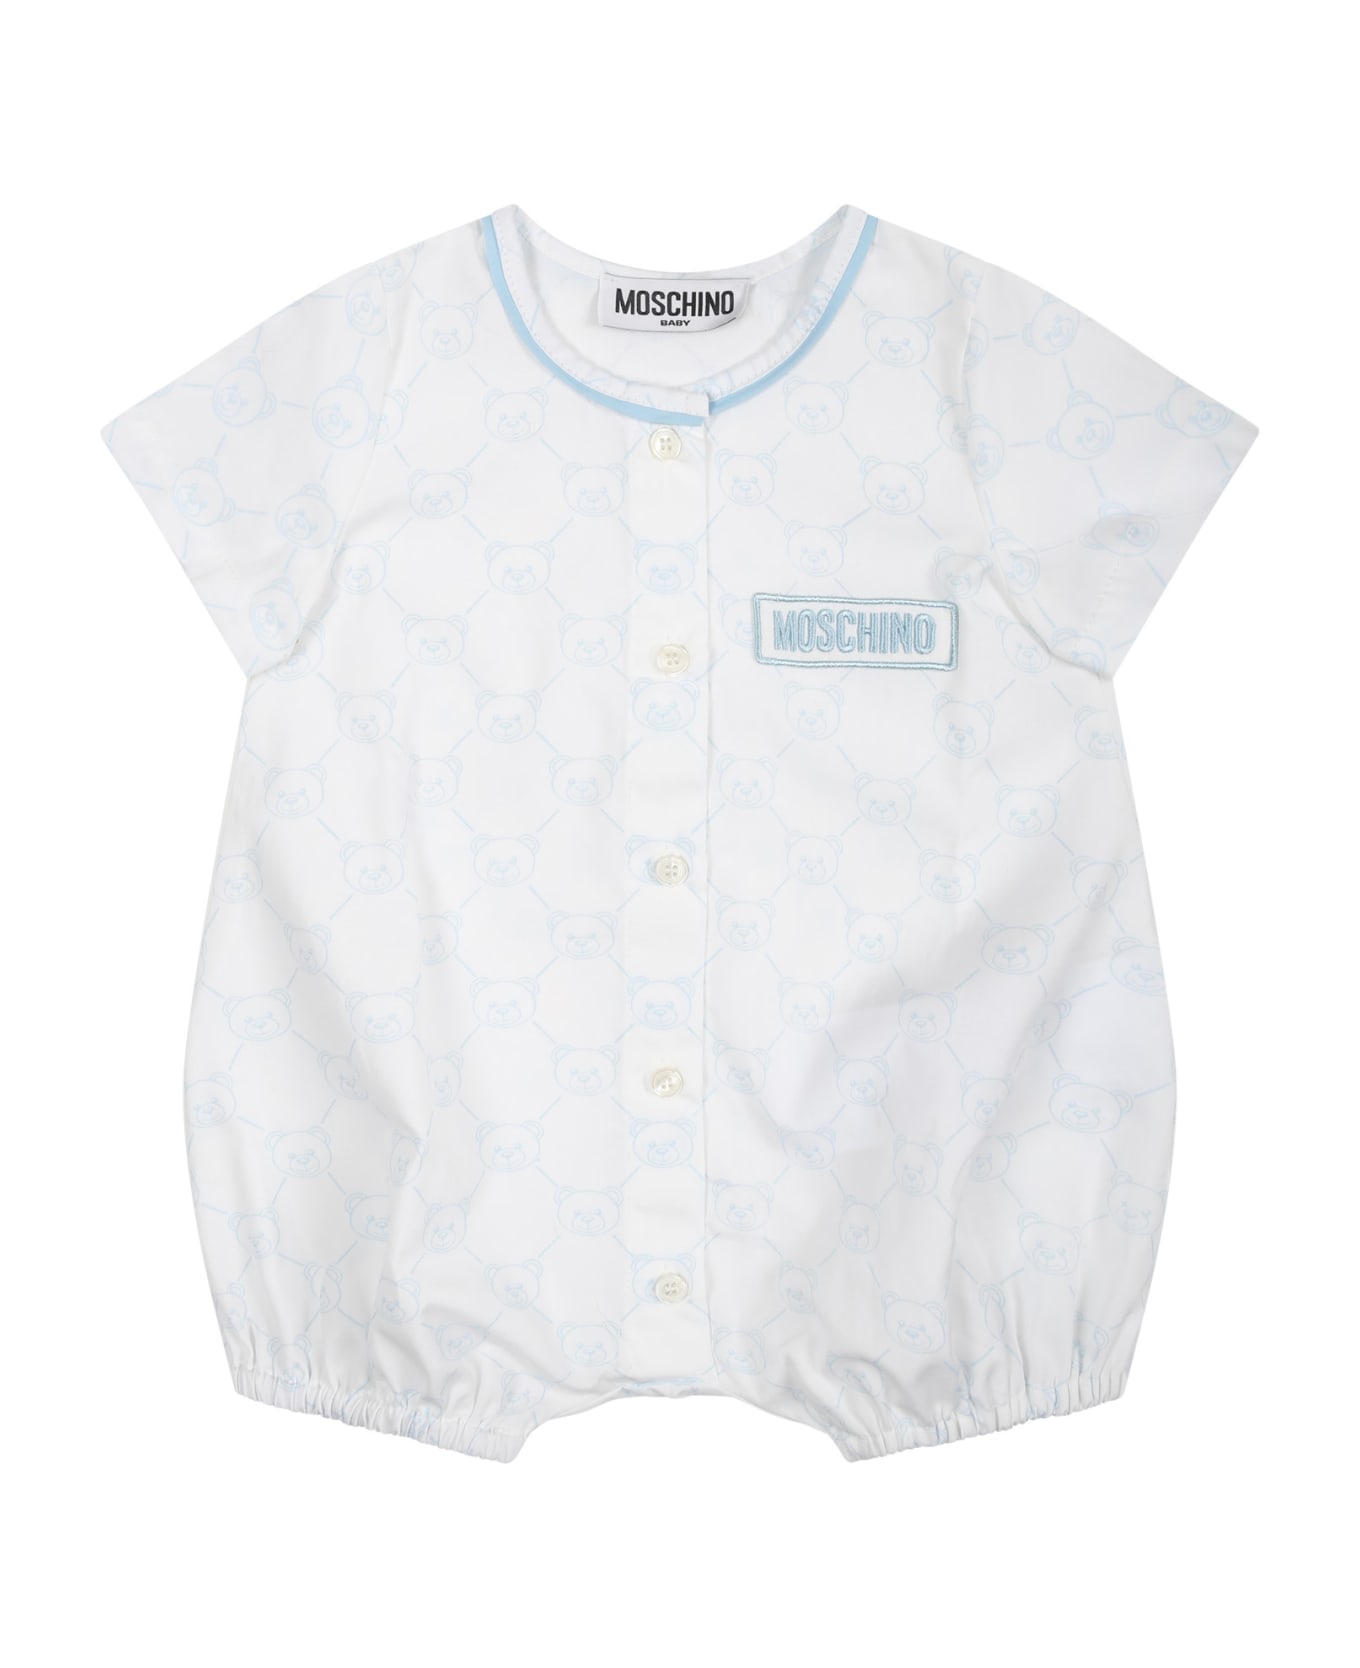 Moschino White Romper For Baby Boy With Teddy Bear Pattern And Logo - White